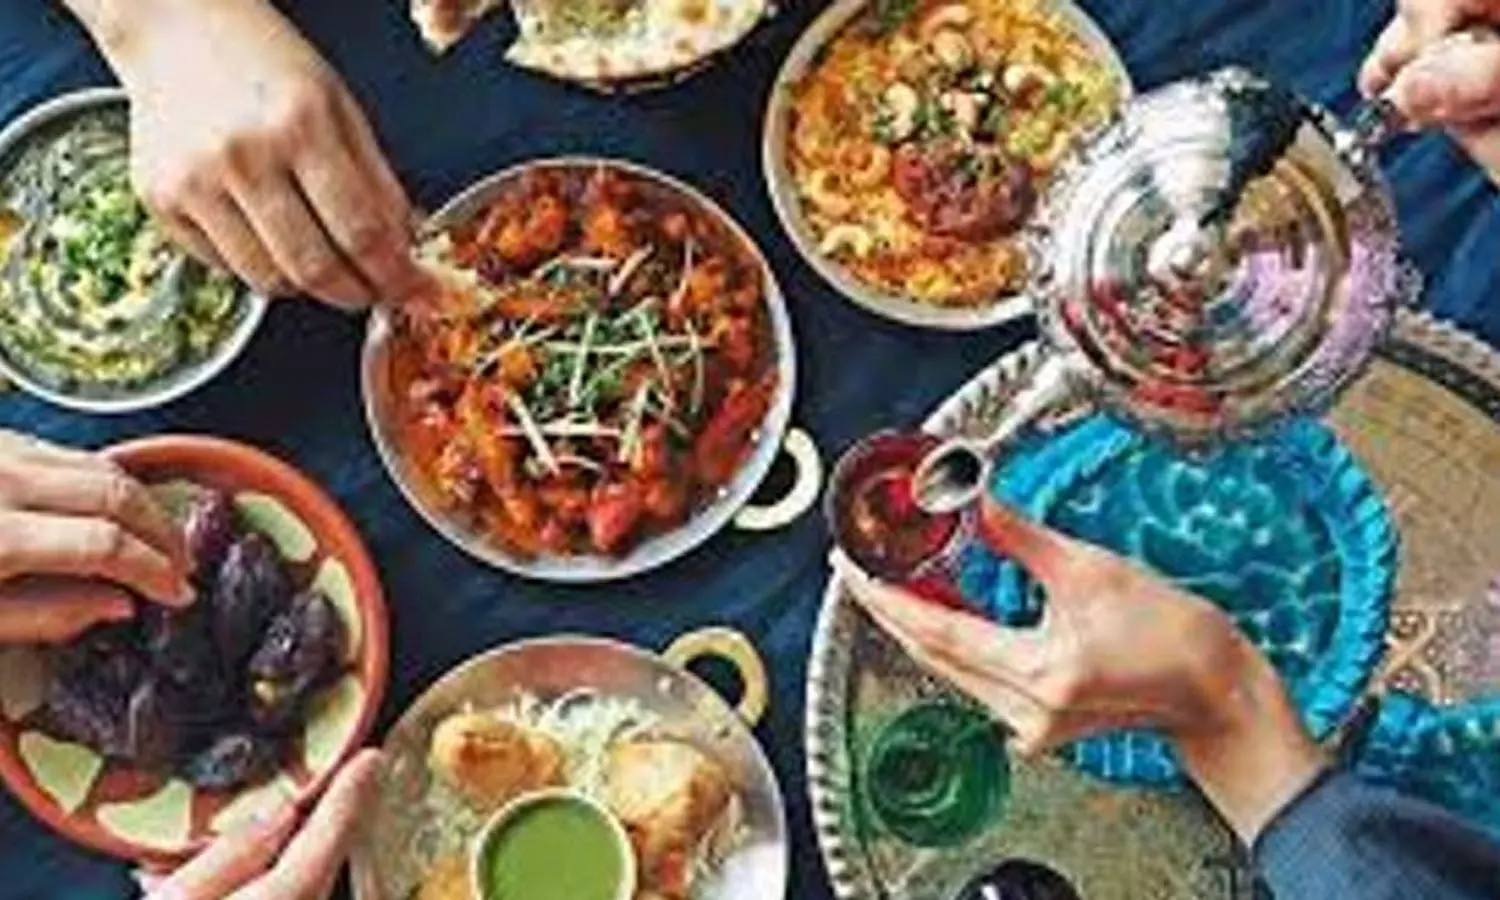 Ramzan 2023: Why are Sheri, Iftar meals so important during fasting month